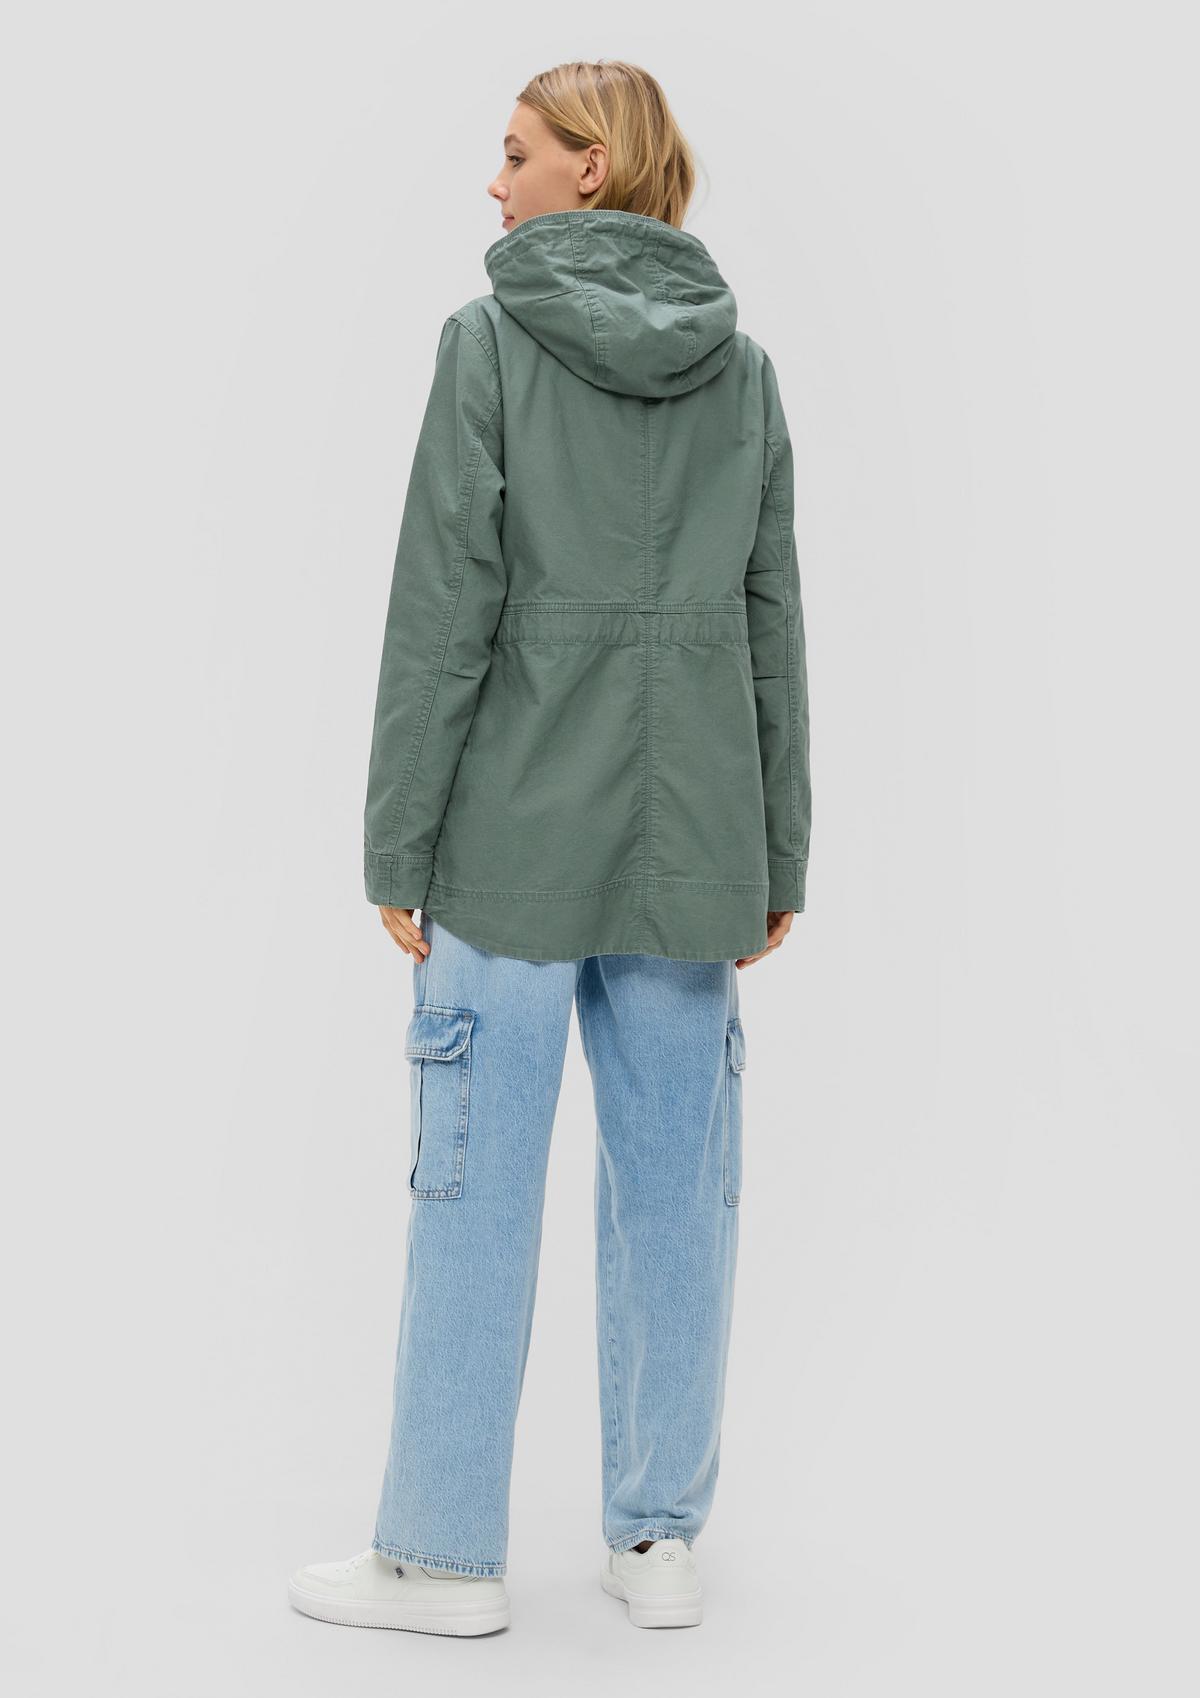 s.Oliver Hoodie with a drawstring